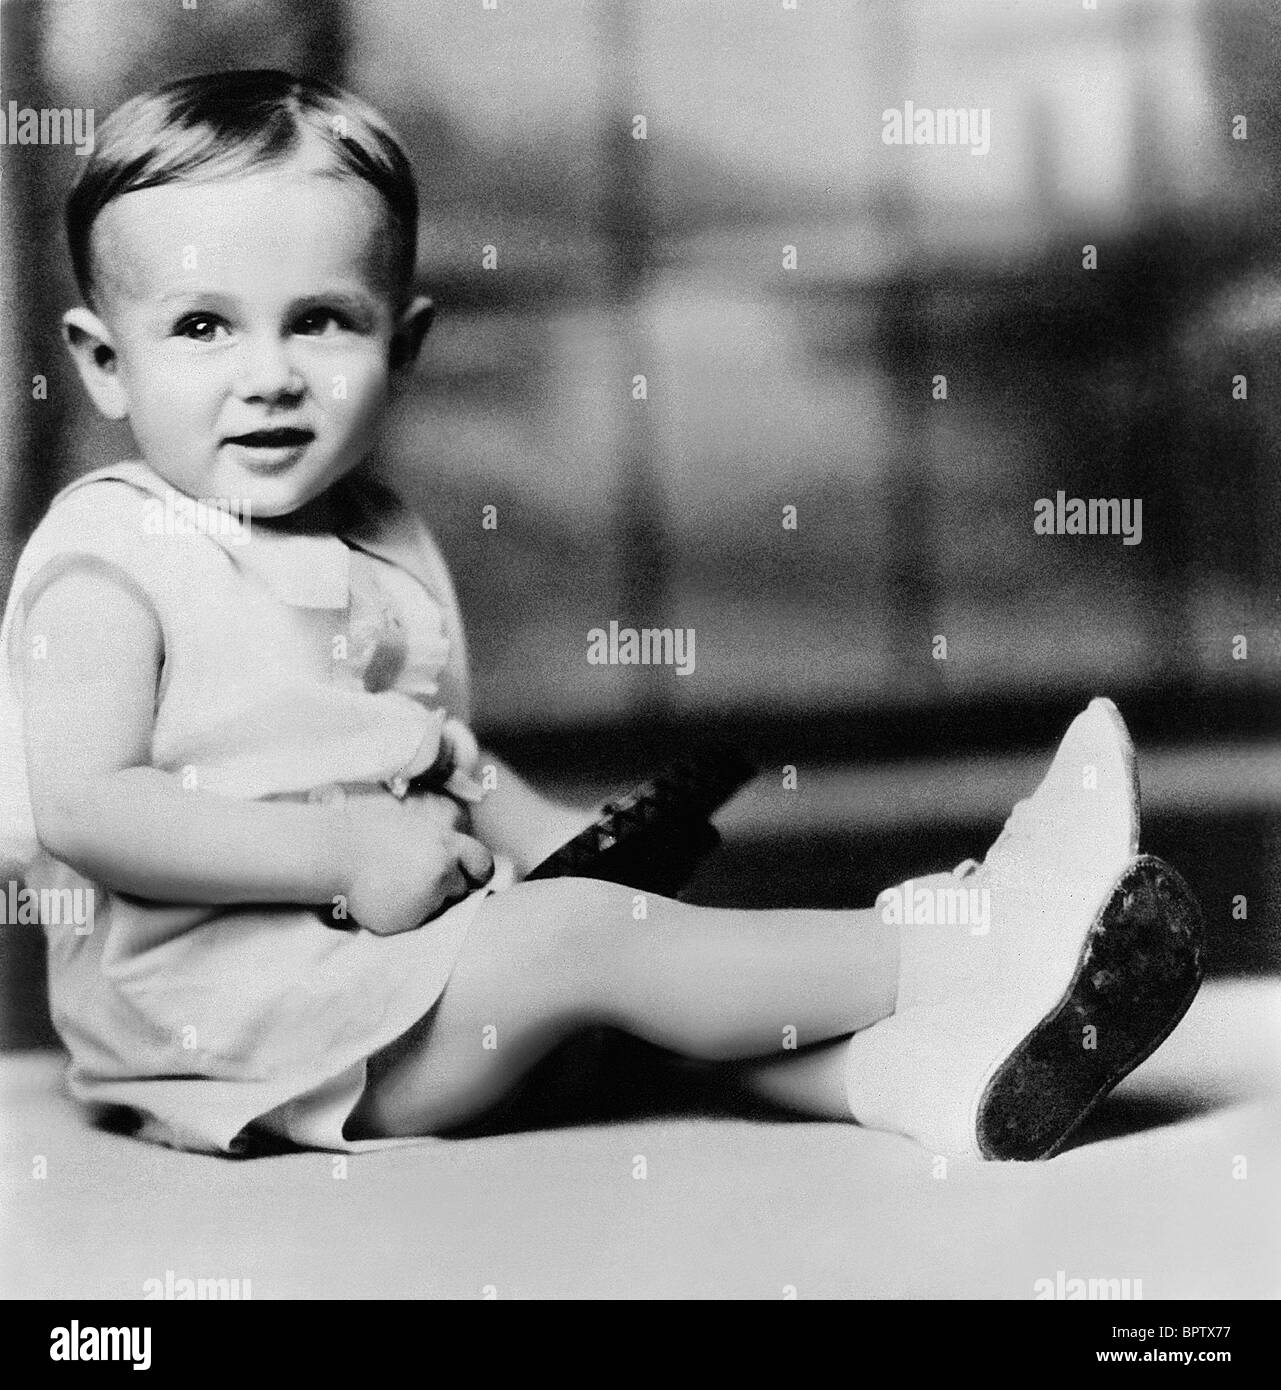 JAMES DEAN CHILD PHOTO OF ACTOR (1933) Stock Photo